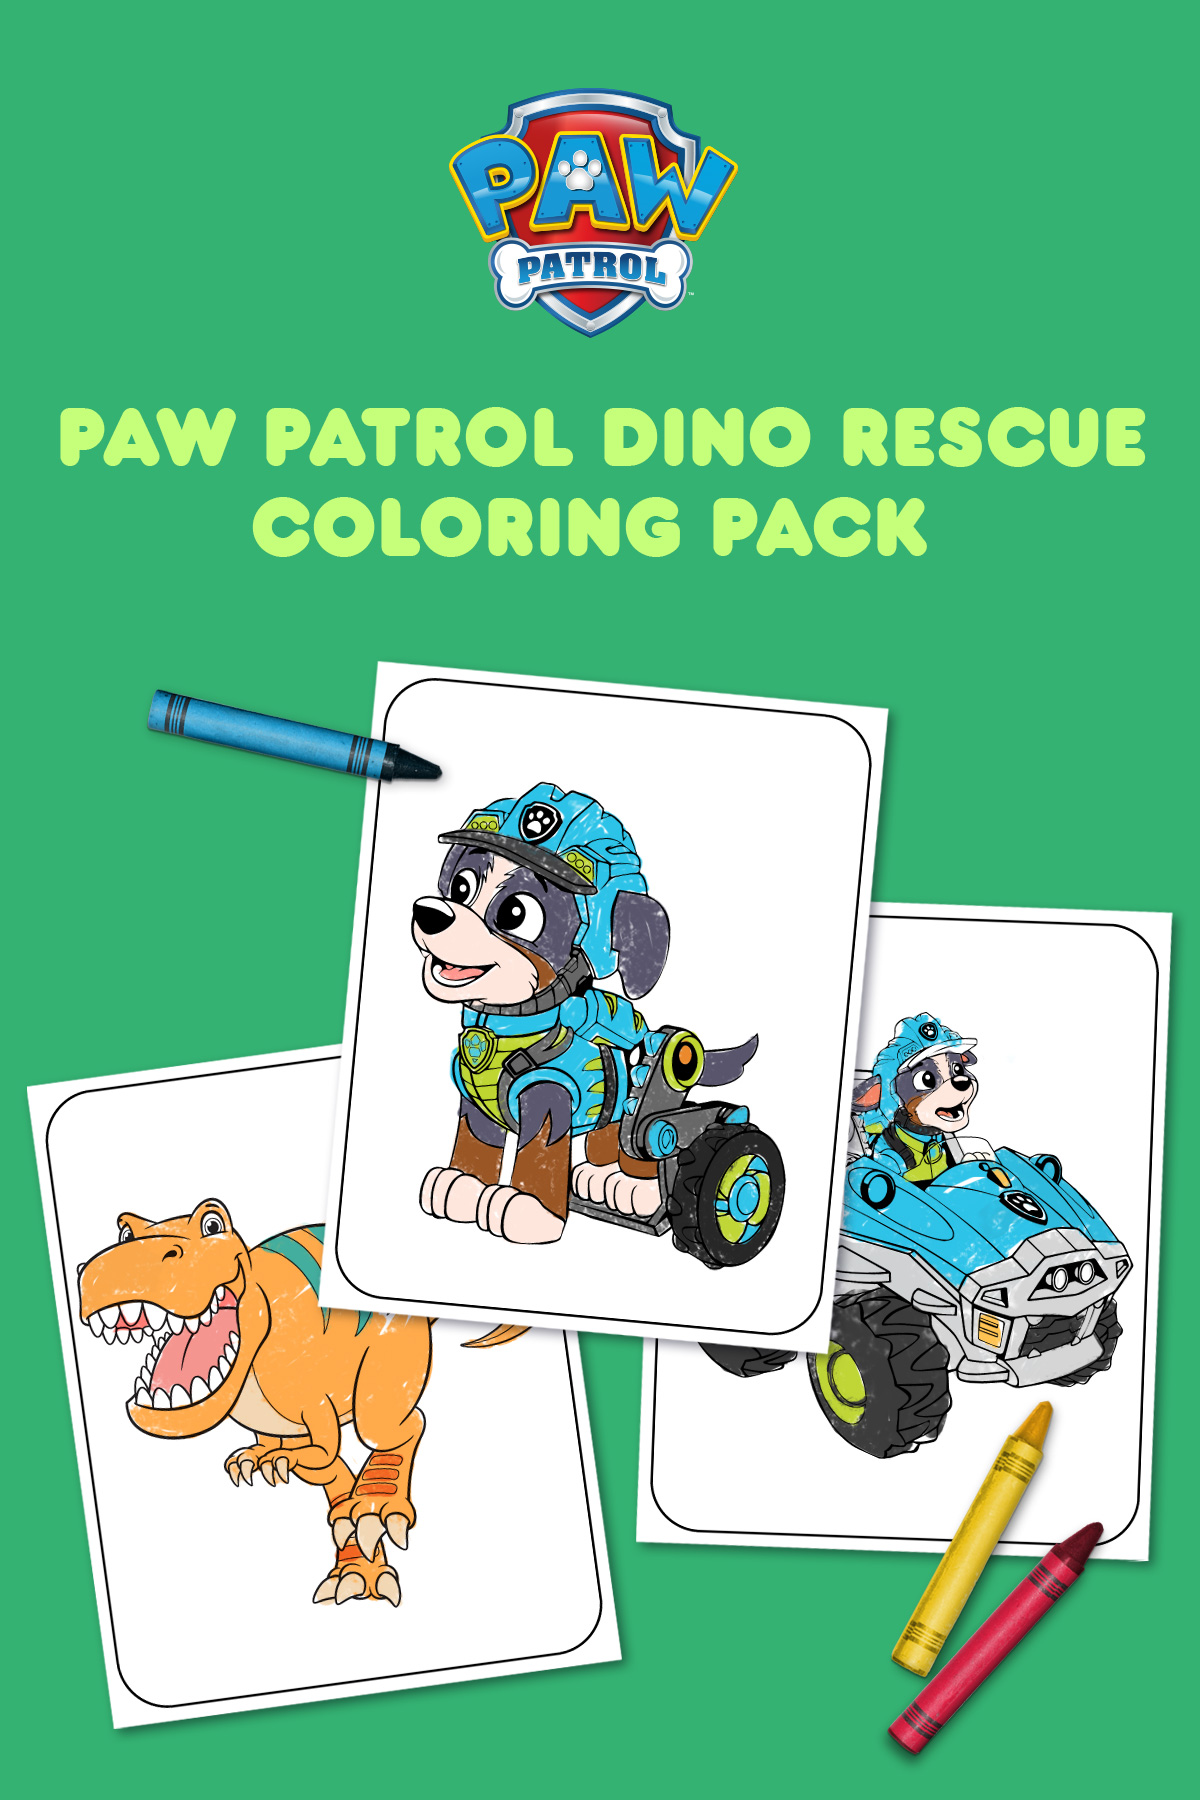 Print This Paw Patrol Dino Rescue Coloring Pack Nickelodeon Parents